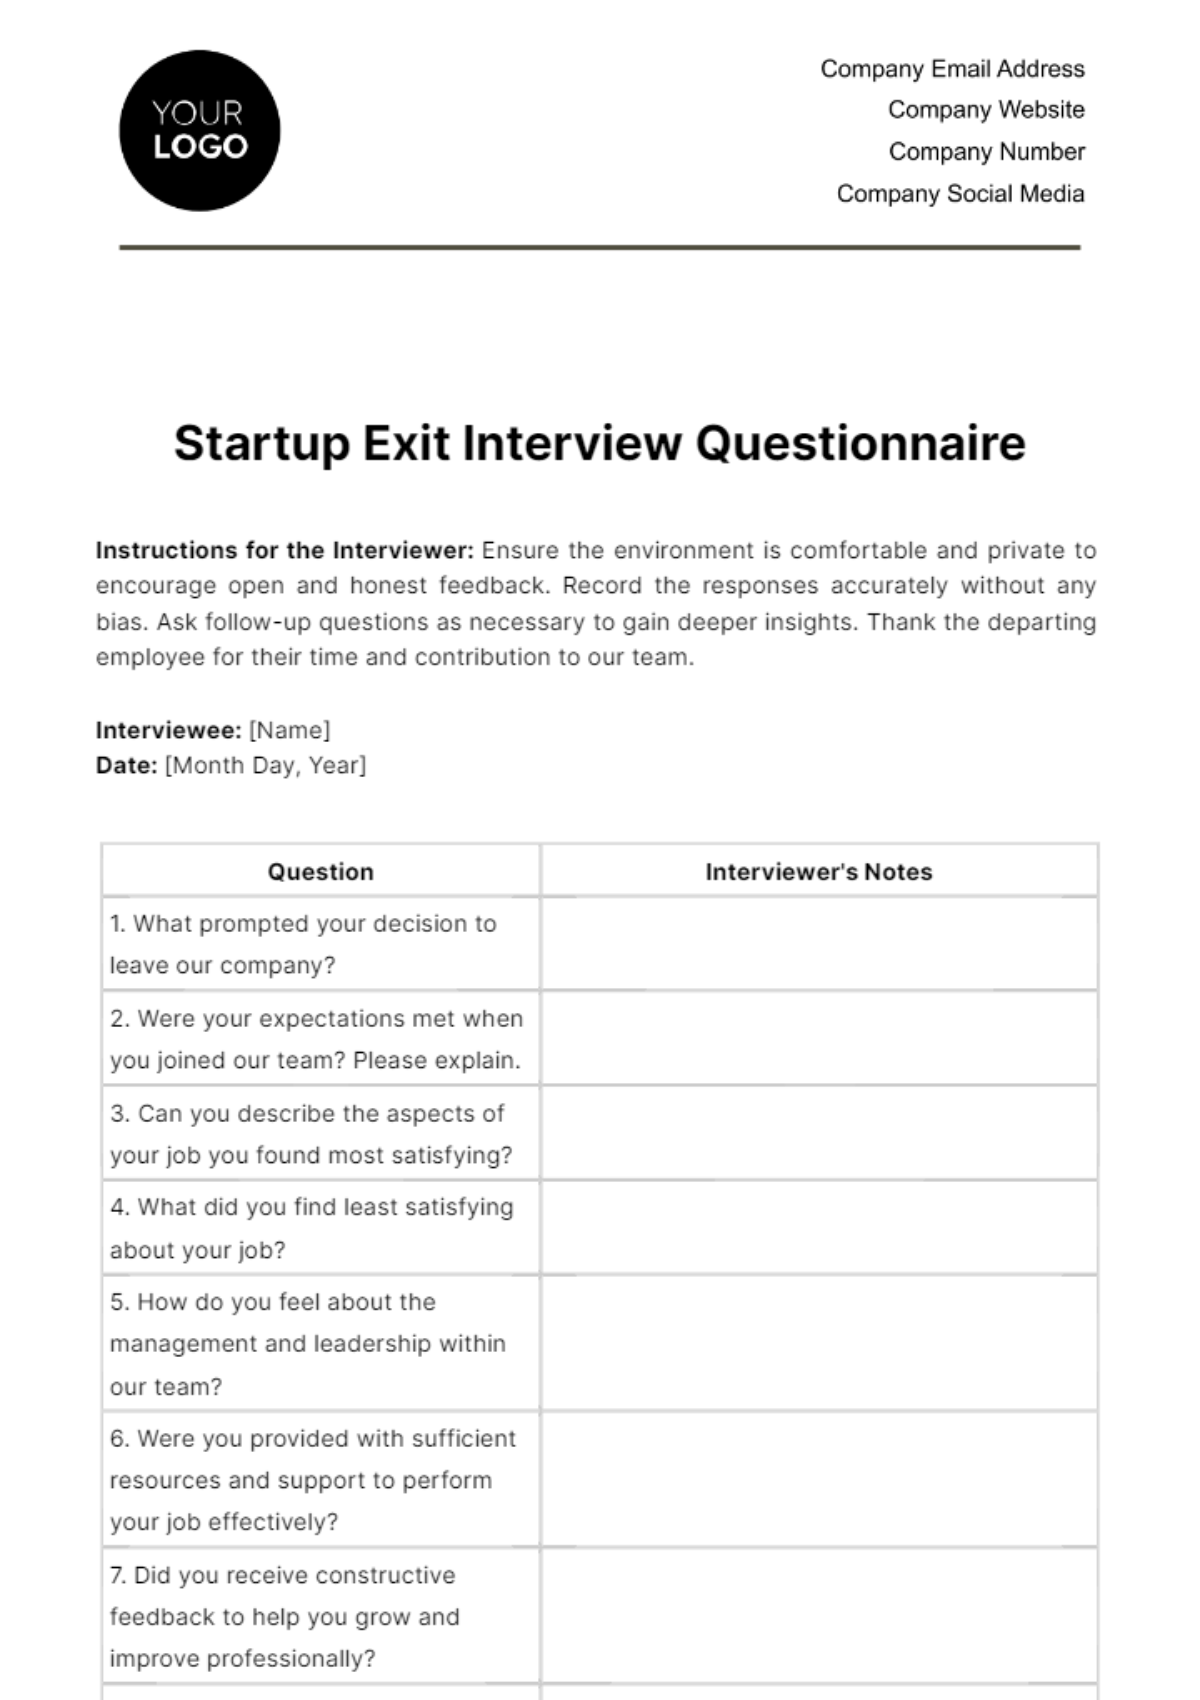 Free Startup Exit Interview Questionnaire Template